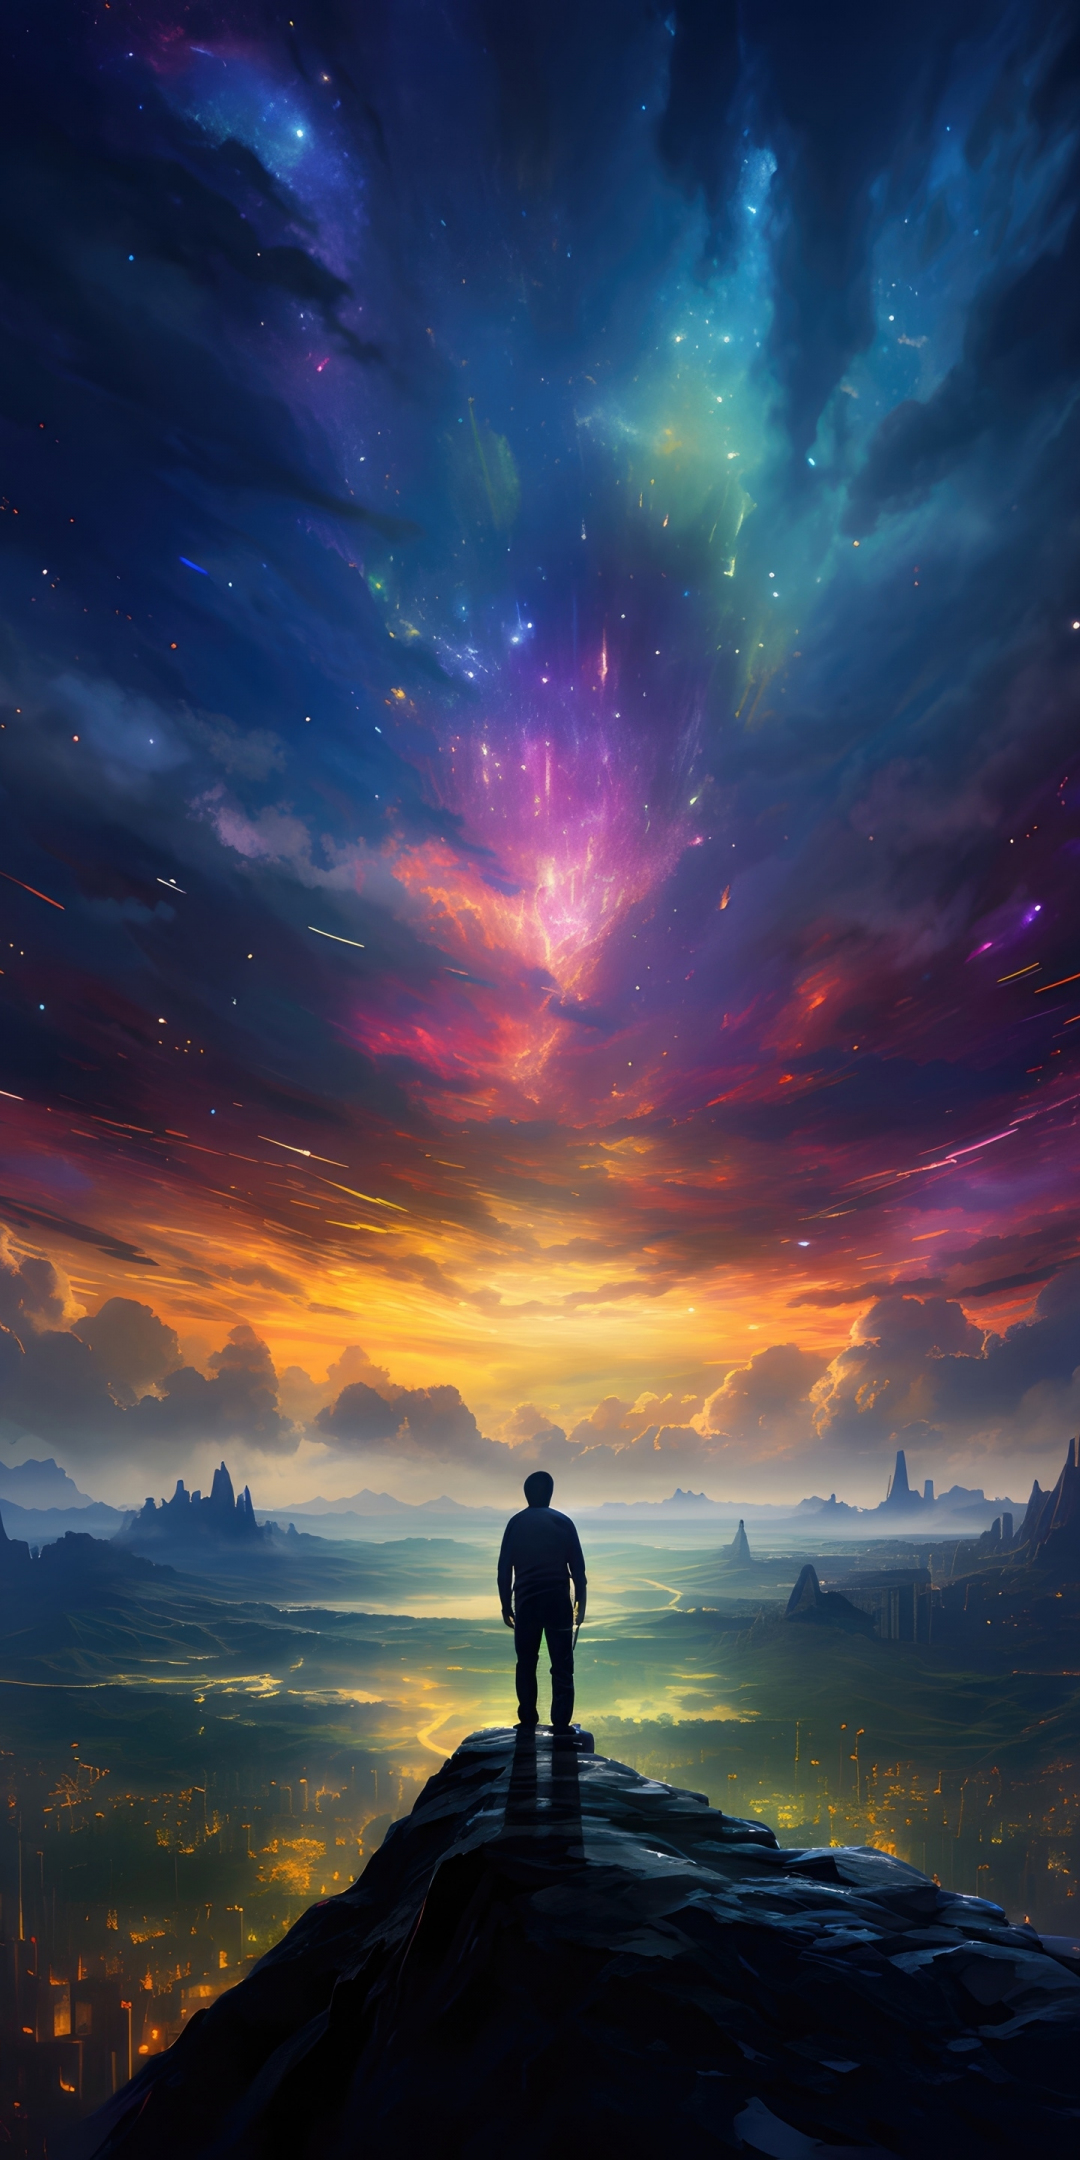 The Dreamy and colourful sky, fantasy, explorer, 1080x2160 wallpaper